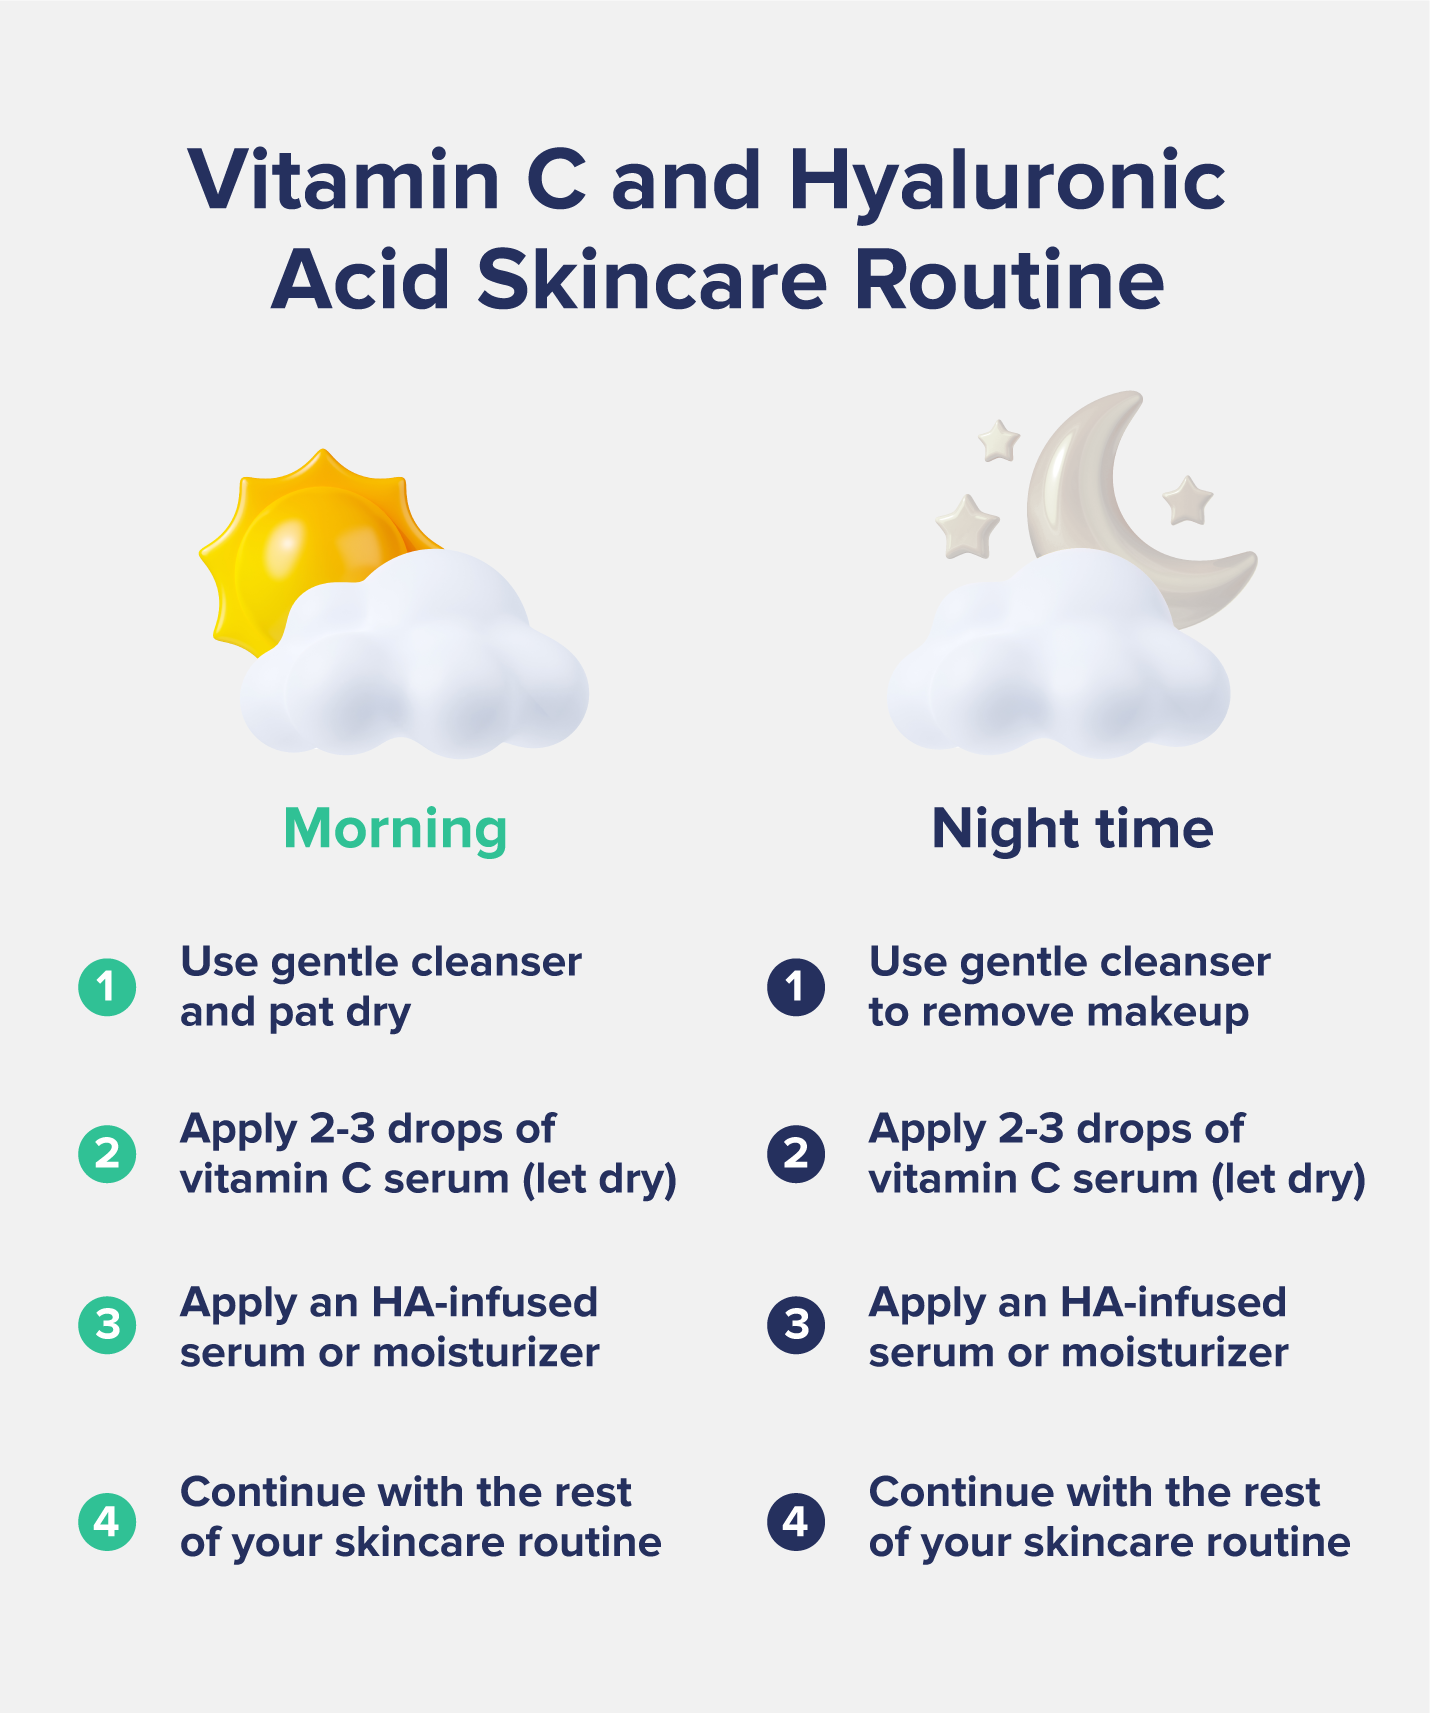 A graphic entitled "Vitamin C and Hyaluronic Acid Skincare Routine", listing morning and night-time routine steps for applying this serum, including gentle cleanser to pat dry, applying the serum, adding moisturizer, and continuing with the rest of your skincare routine.